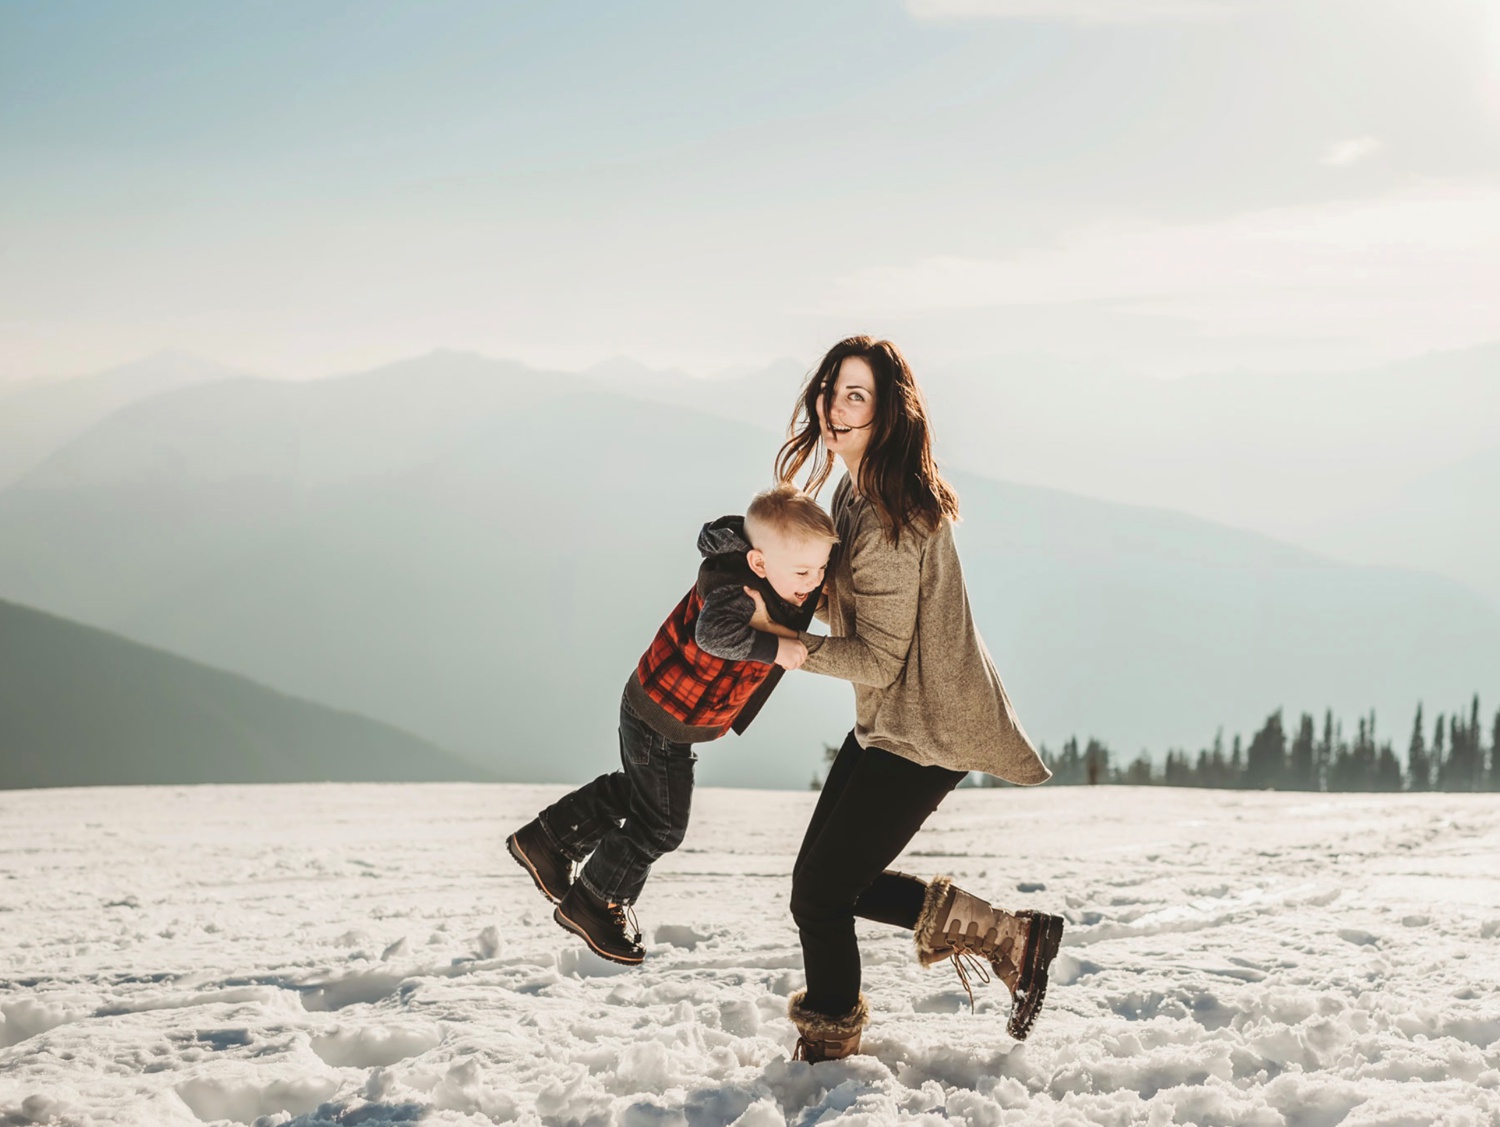 How Should I Approach Photography Marketing? | Fiona of Fiona Photography Education, Mom and Child on Snowy Mountain